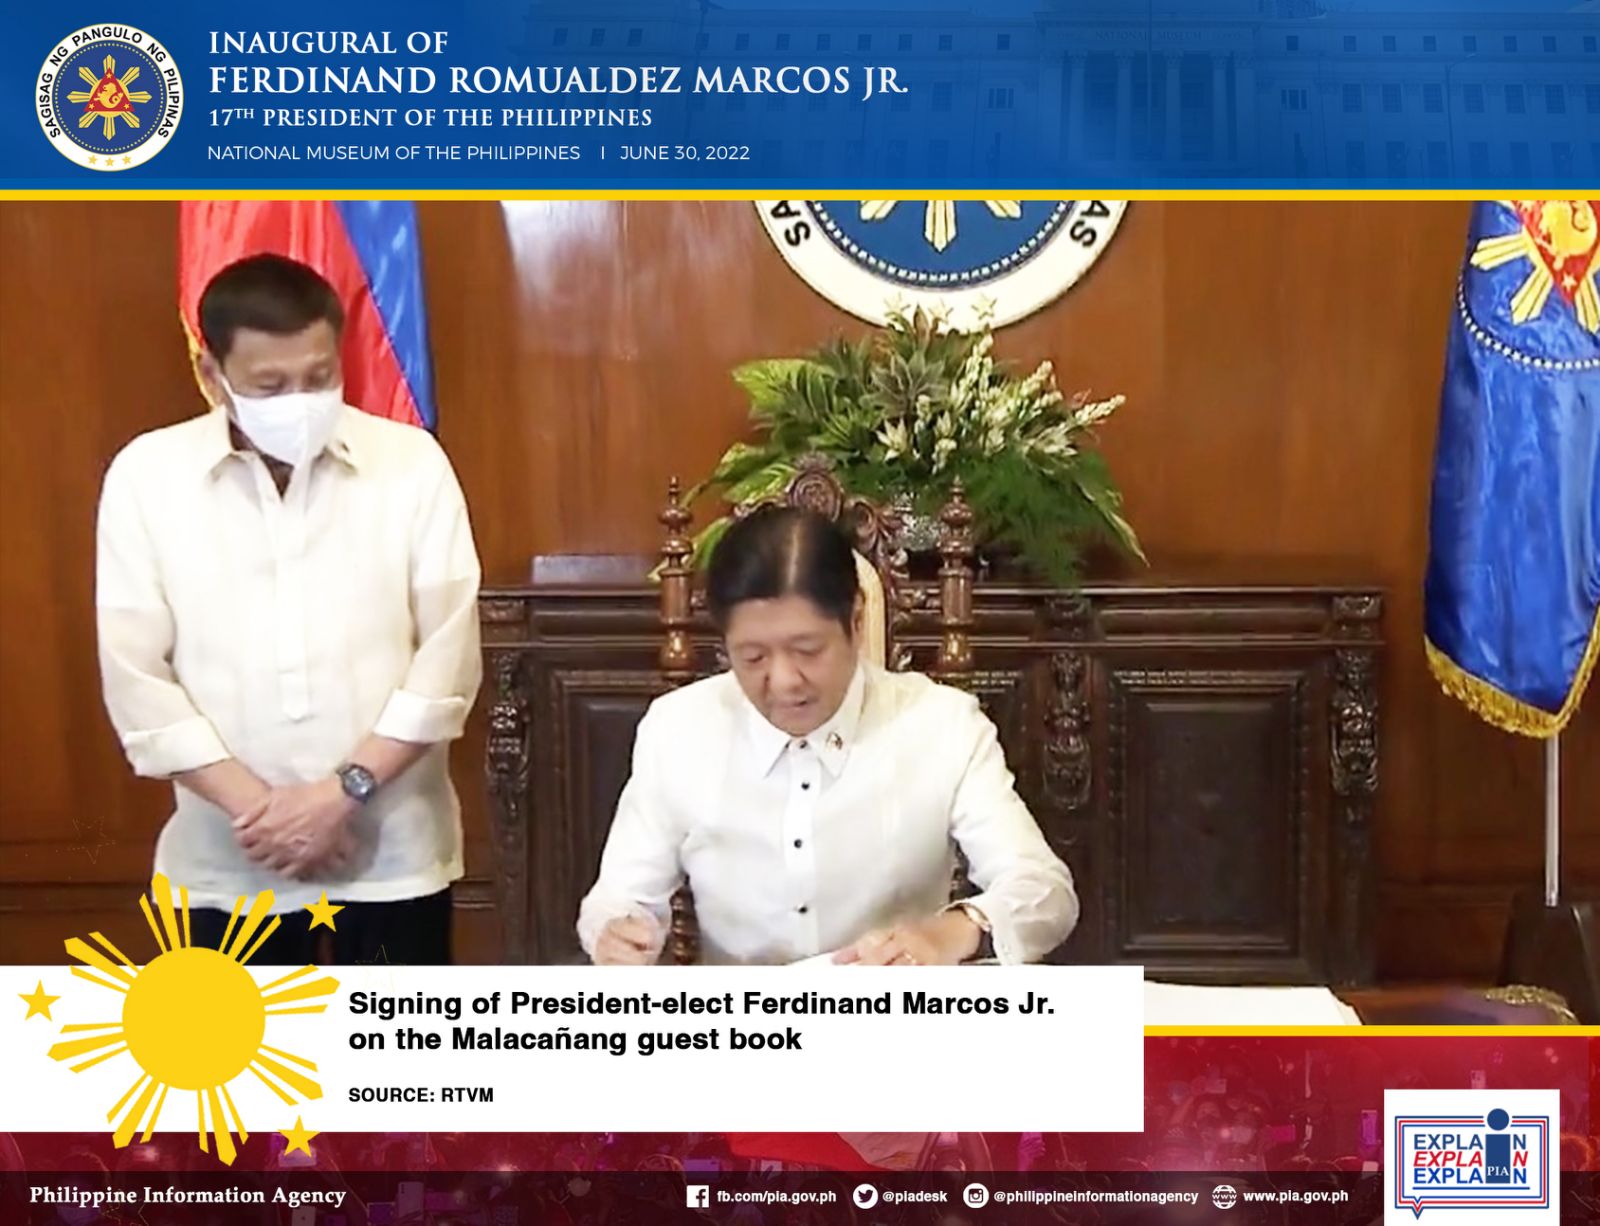 President-elect Ferdinand Marcos Jr. signed on the Palace’s guest book